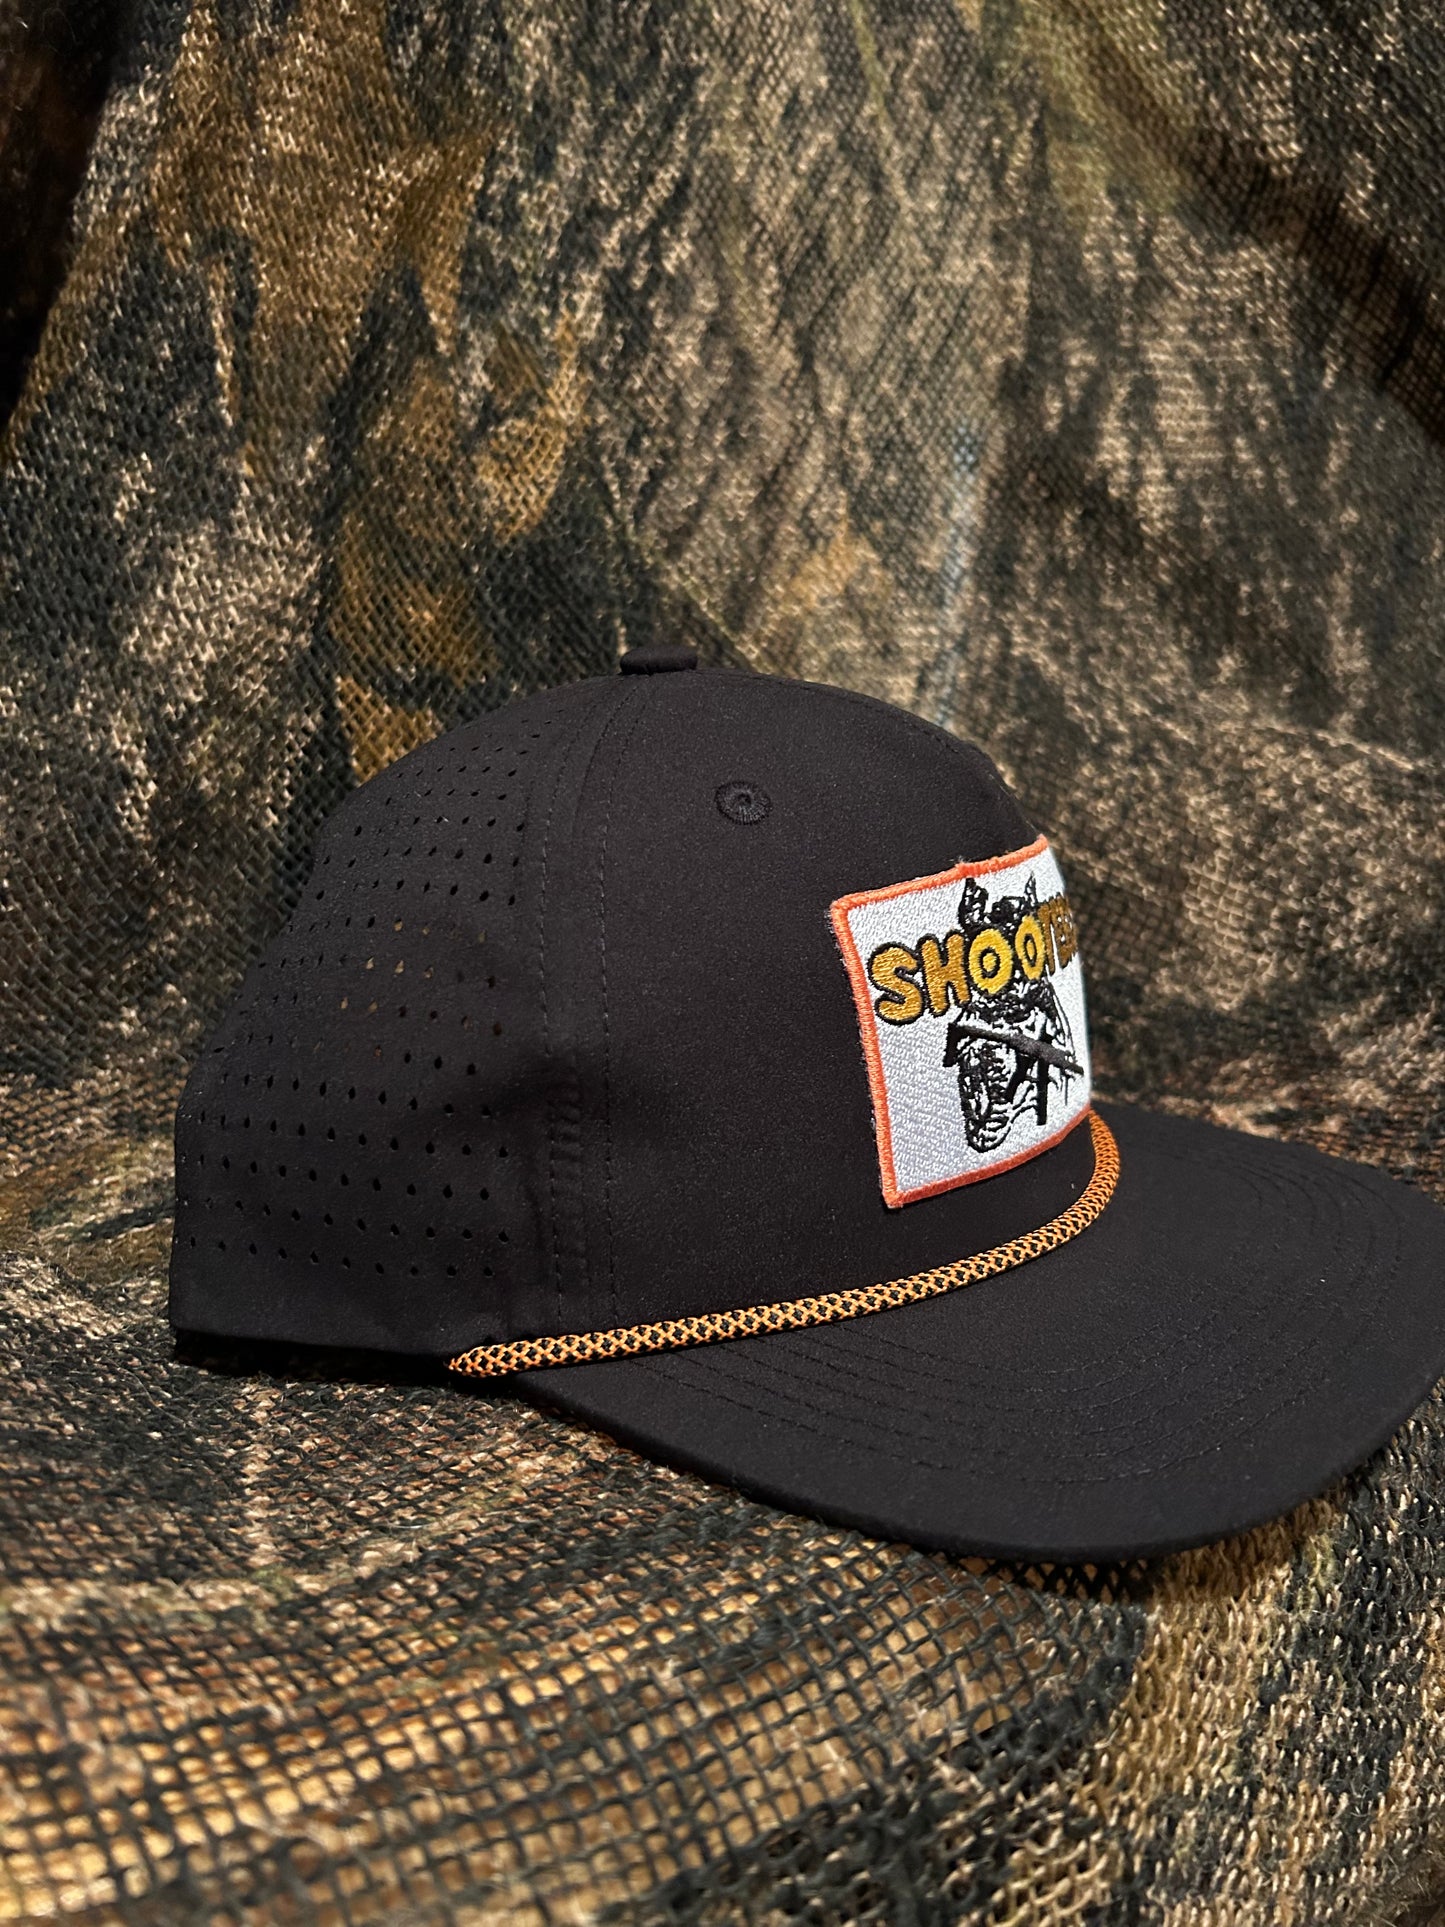 Shooters patch on a black SnapBack hat